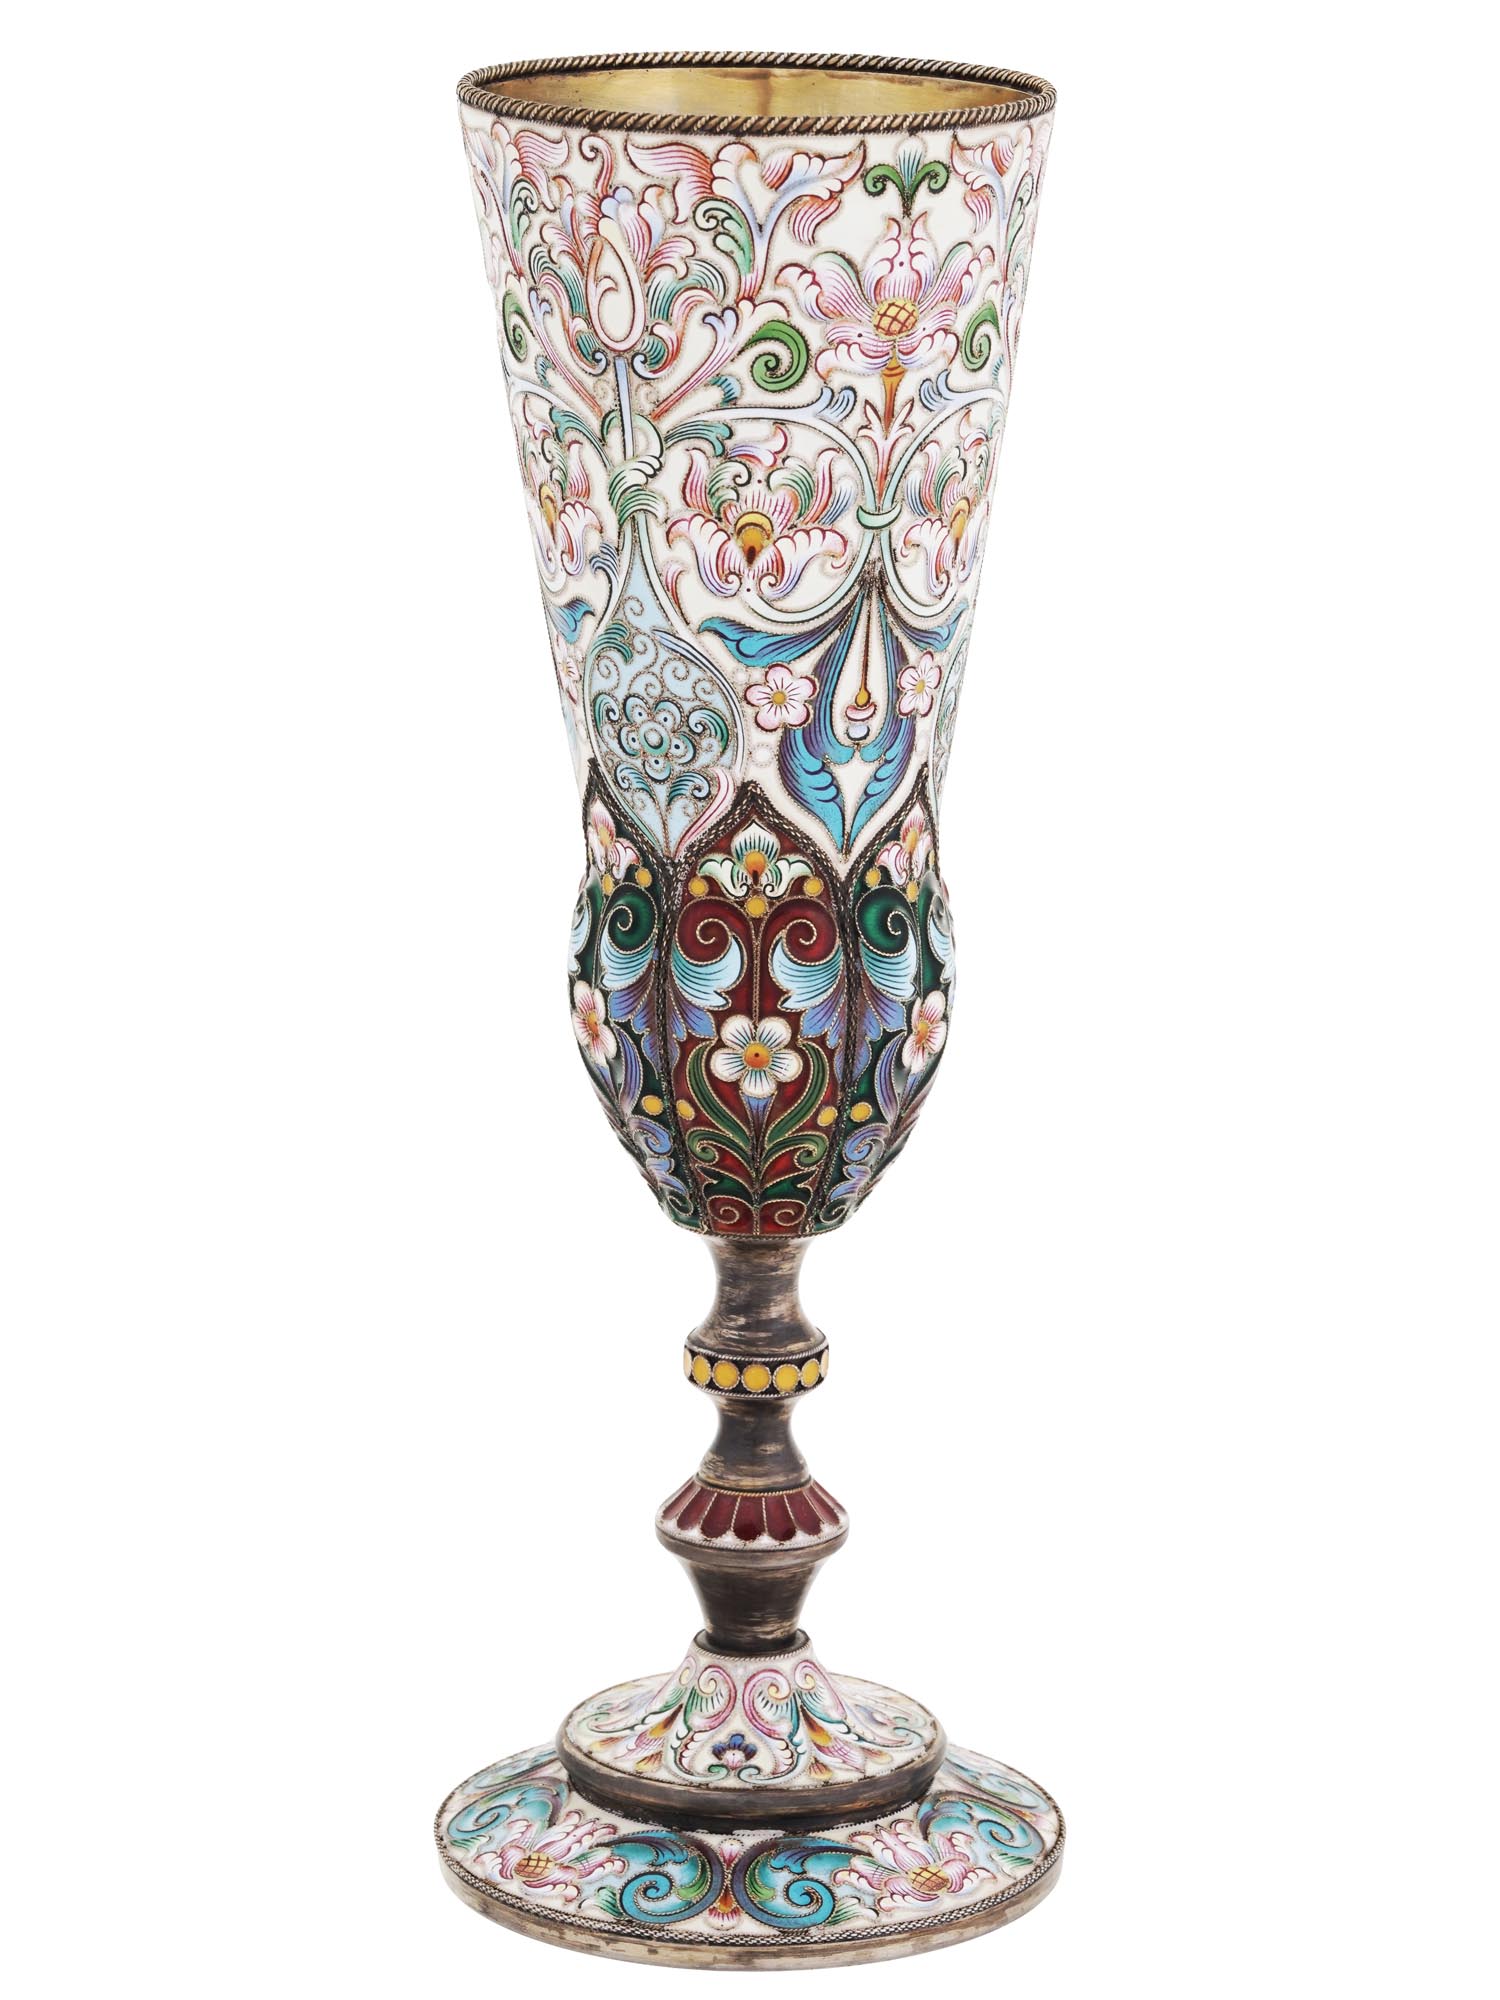 TALL RUSSIAN 88 SILVER CLOISONNE ENAMEL GOBLET PIC-0